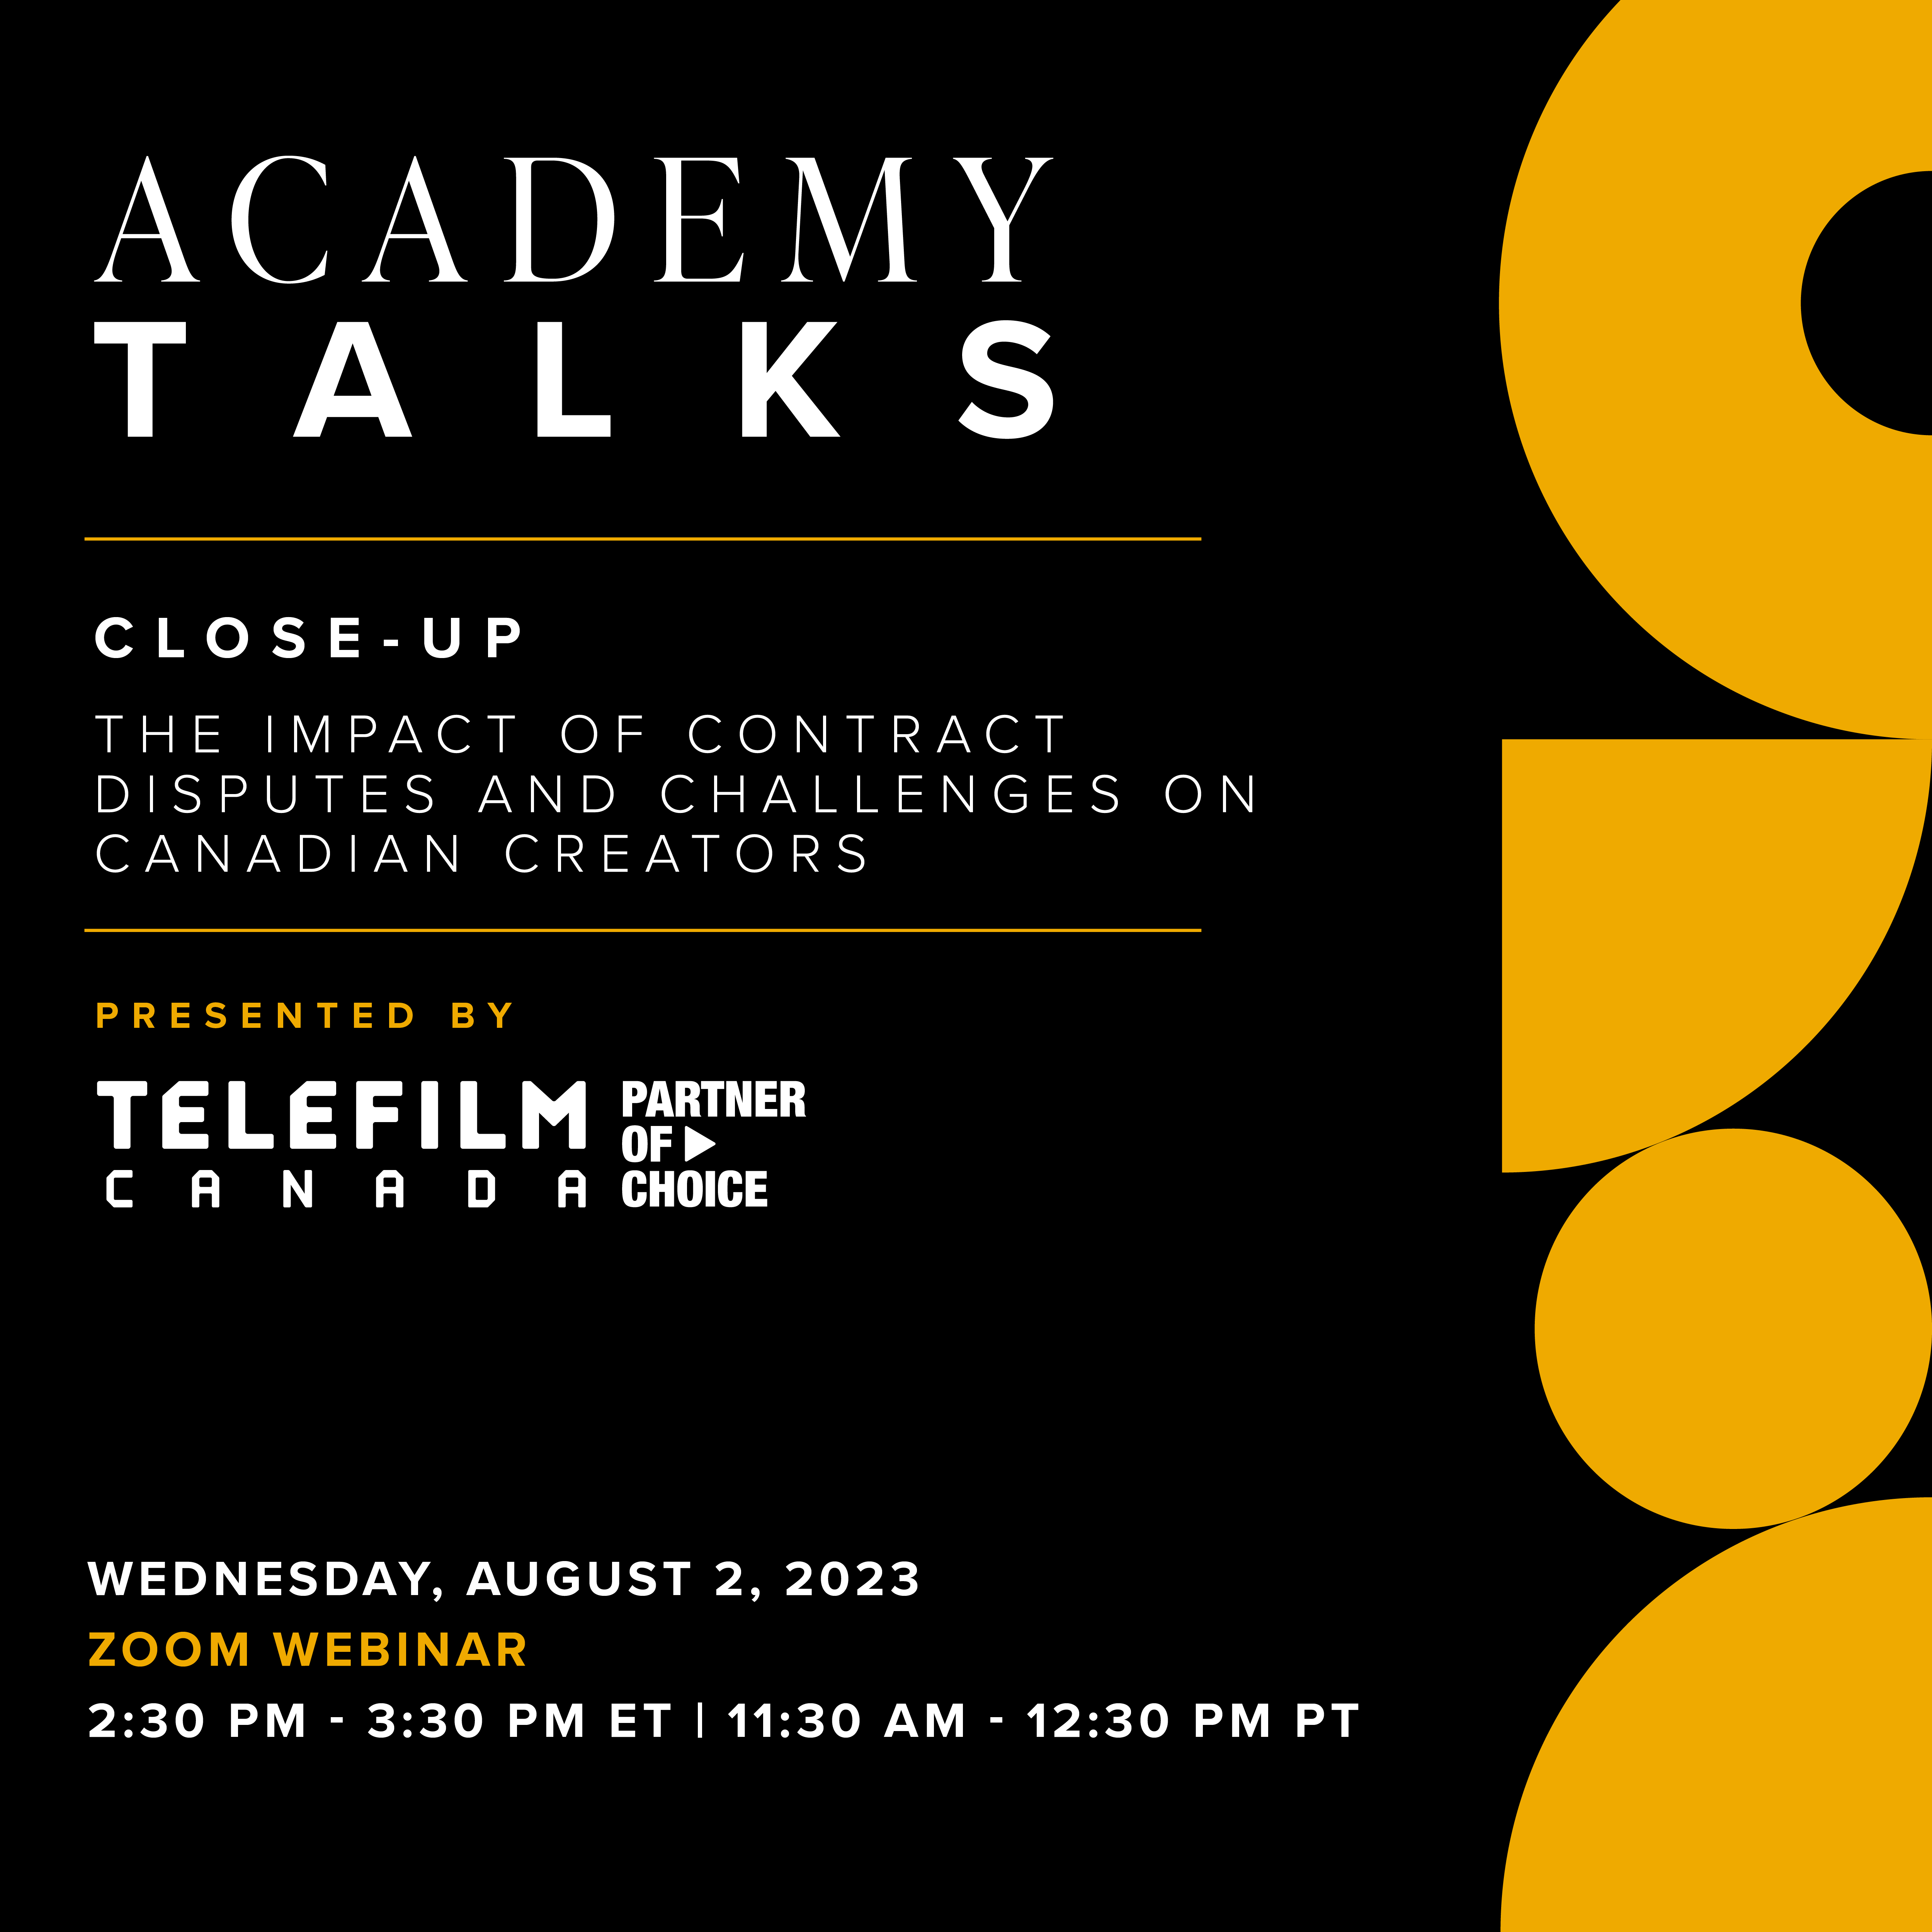 Academy Talks: Close-Up | The Impact of Contract Disputes and Challenges on Canadian Creators